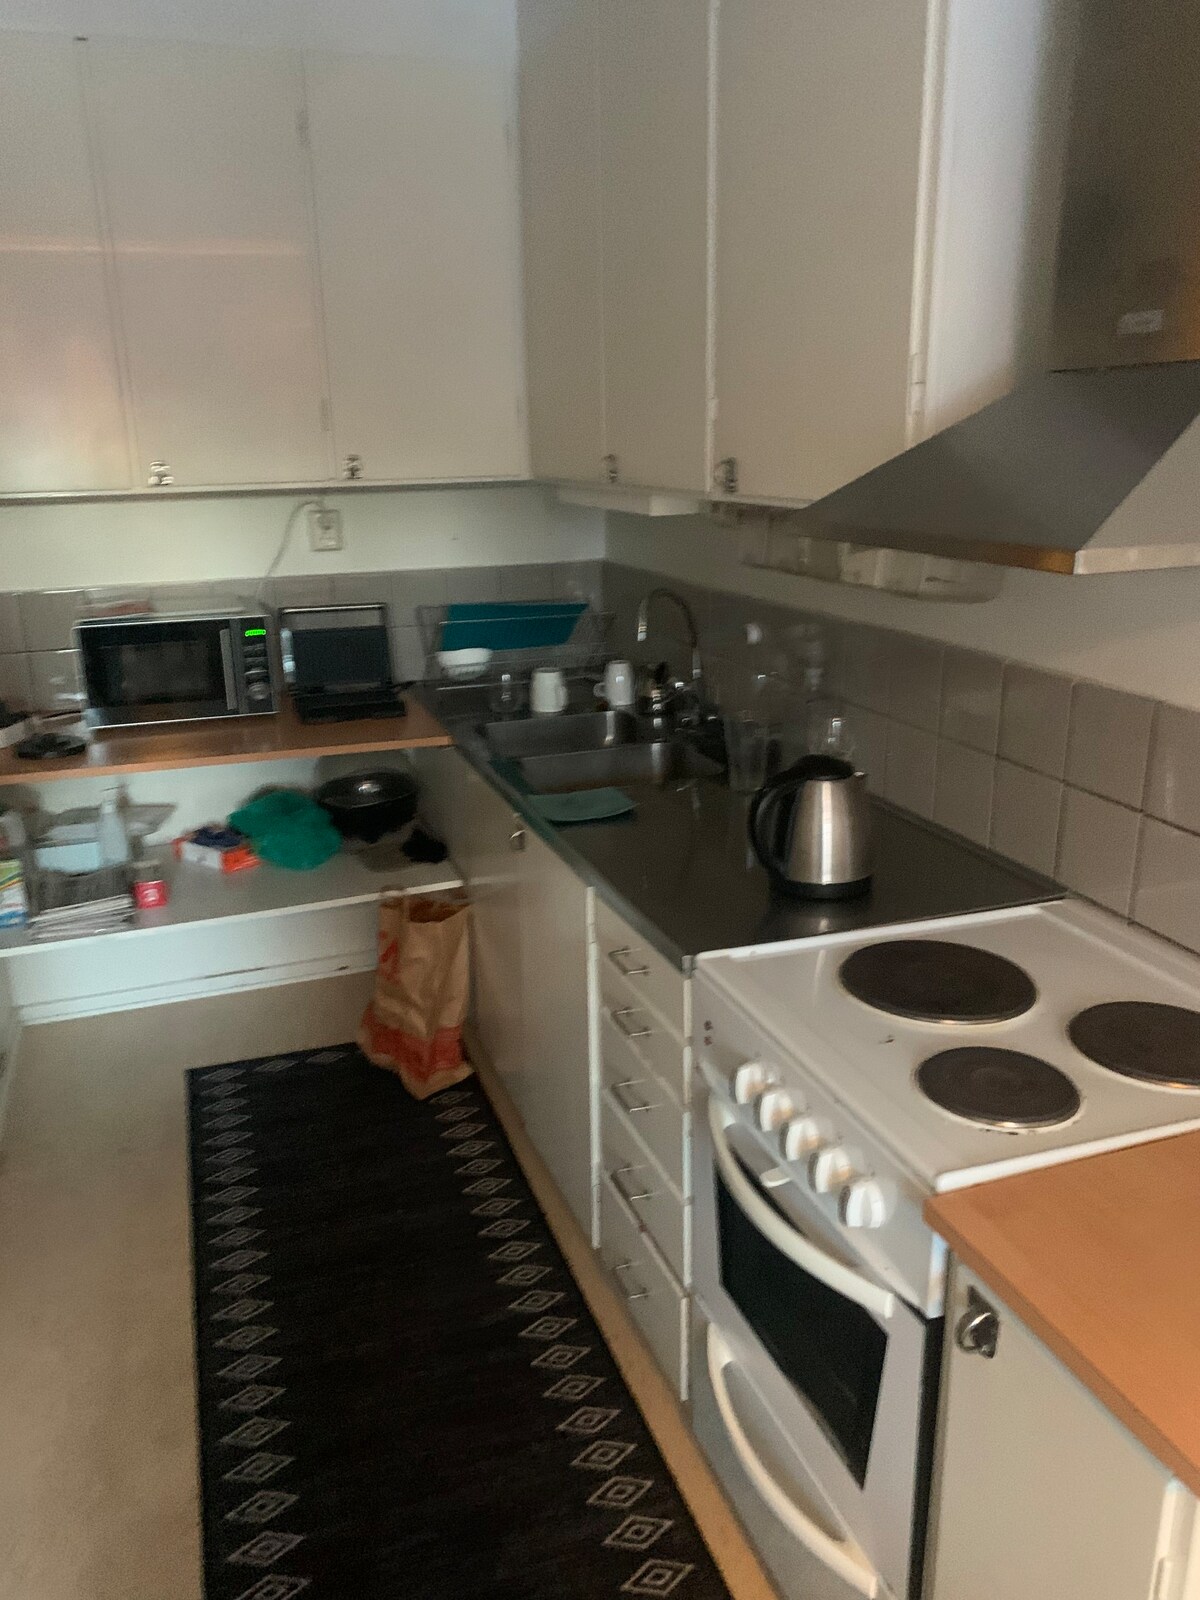 Very Nice Apartment 15 minutes from Stockholm